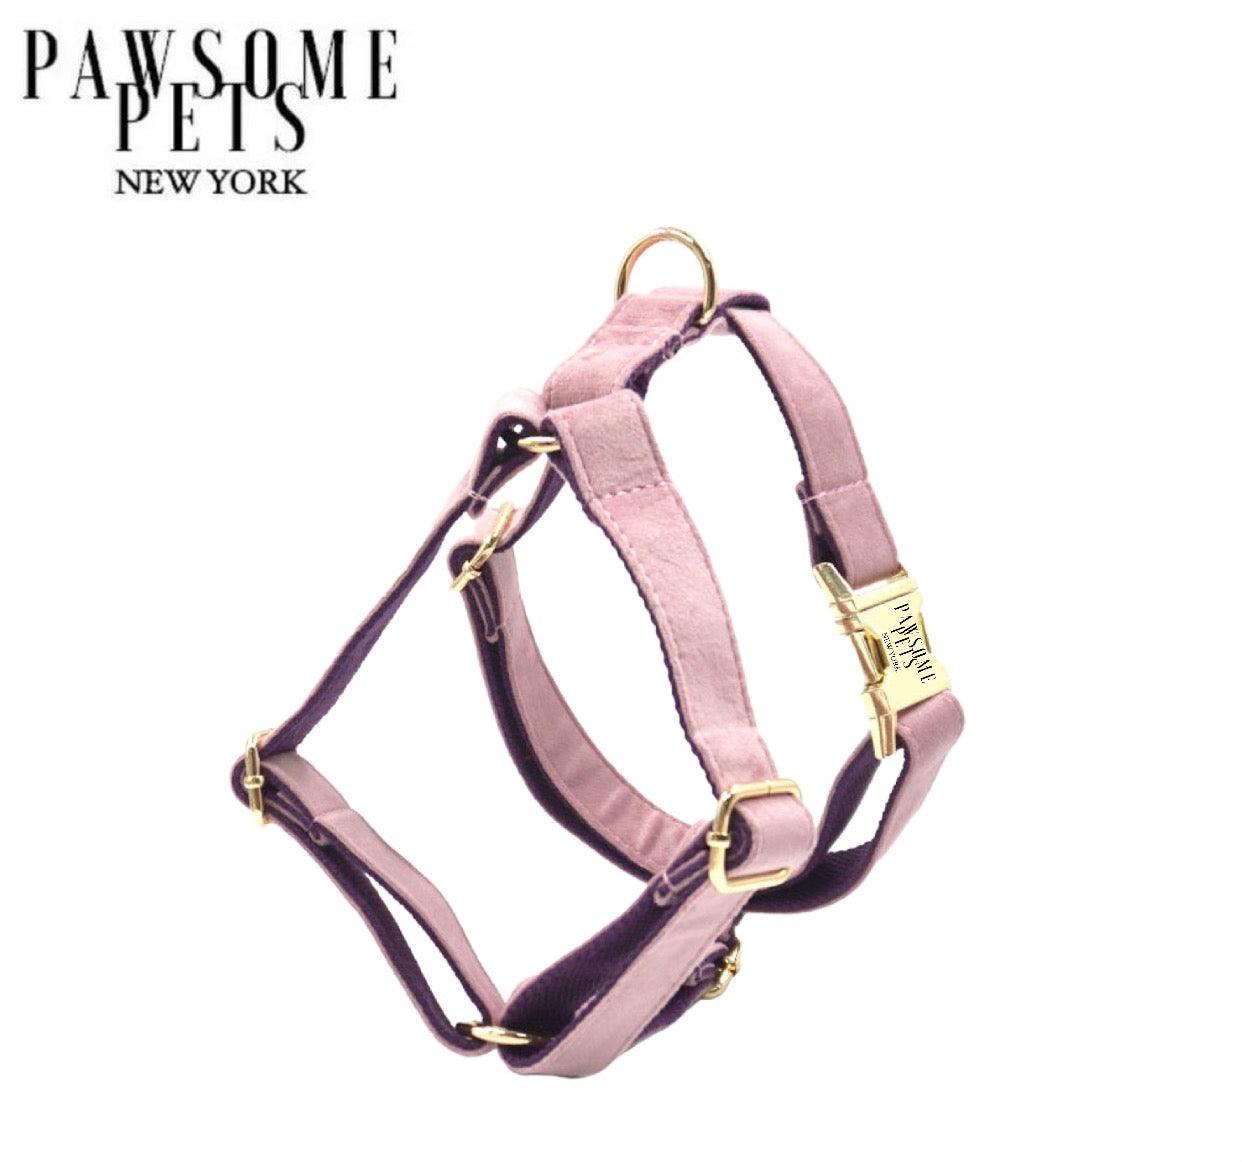 STEP IN HARNESS - PINK